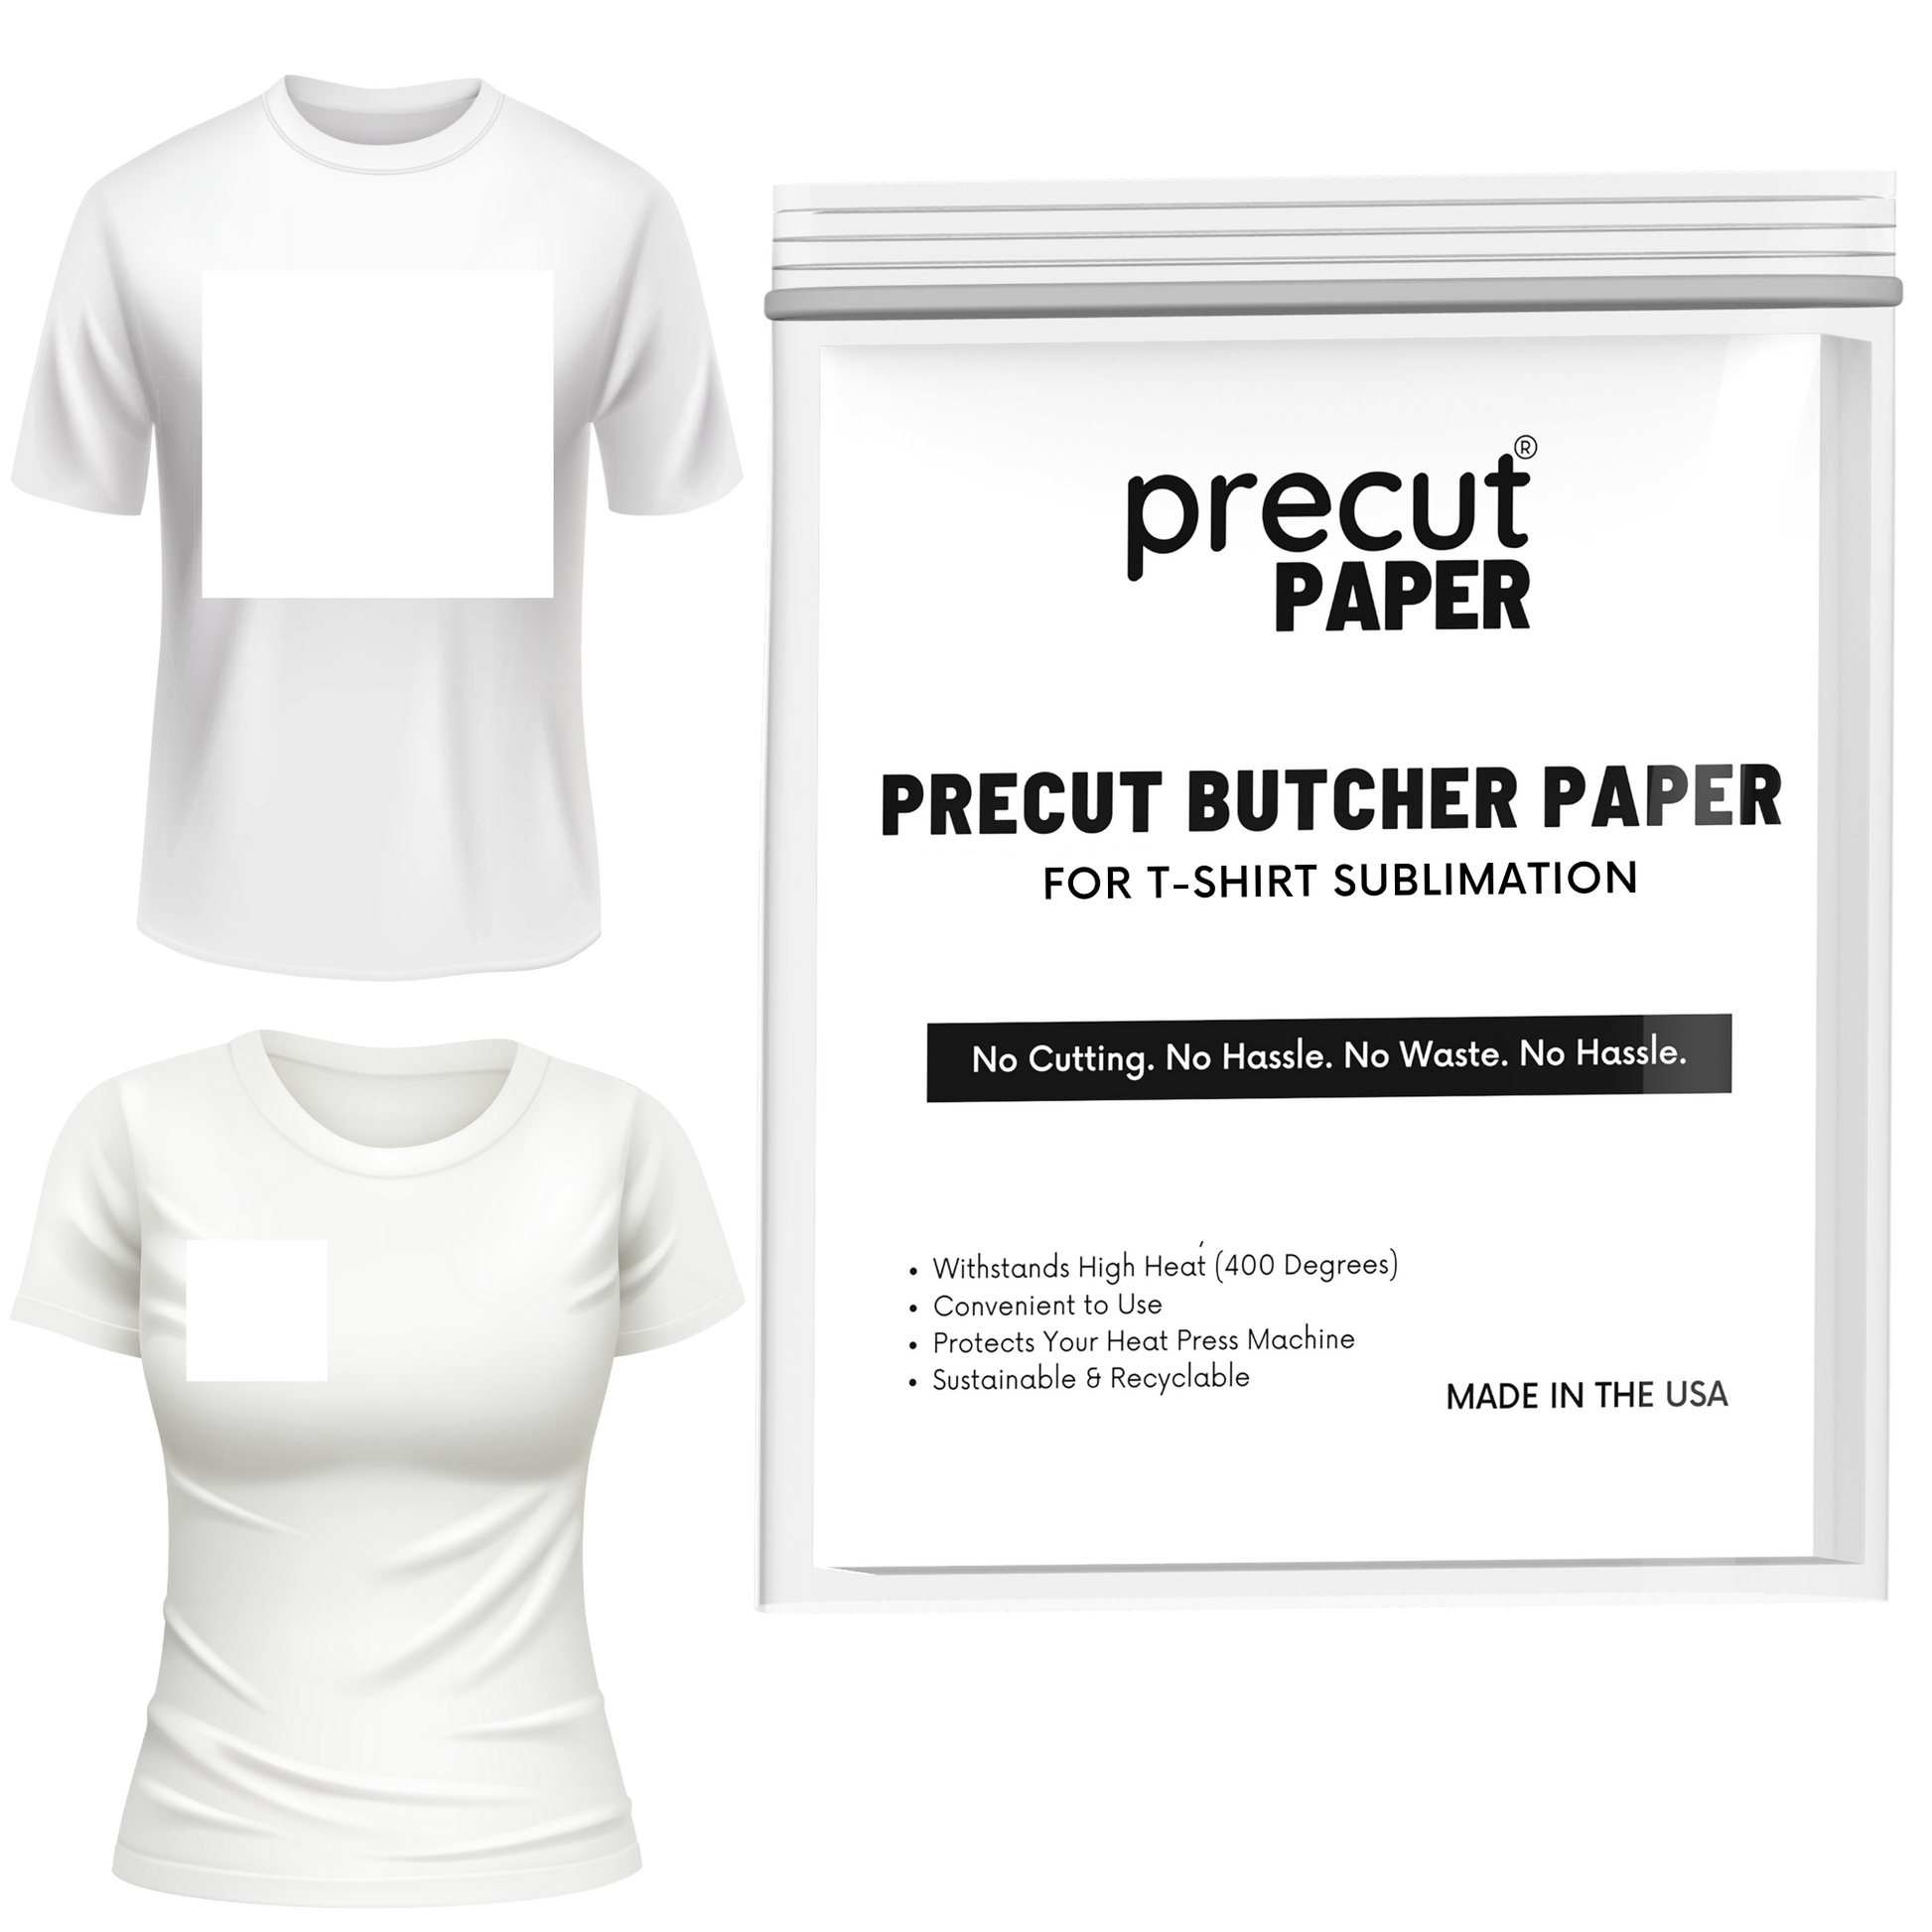 Custom Size Precut Butcher Paper Sheets for Sublimation and Heat Press Crafts, White, Uncoated, Size: Under 12 in x 12 in - We'll Message You for